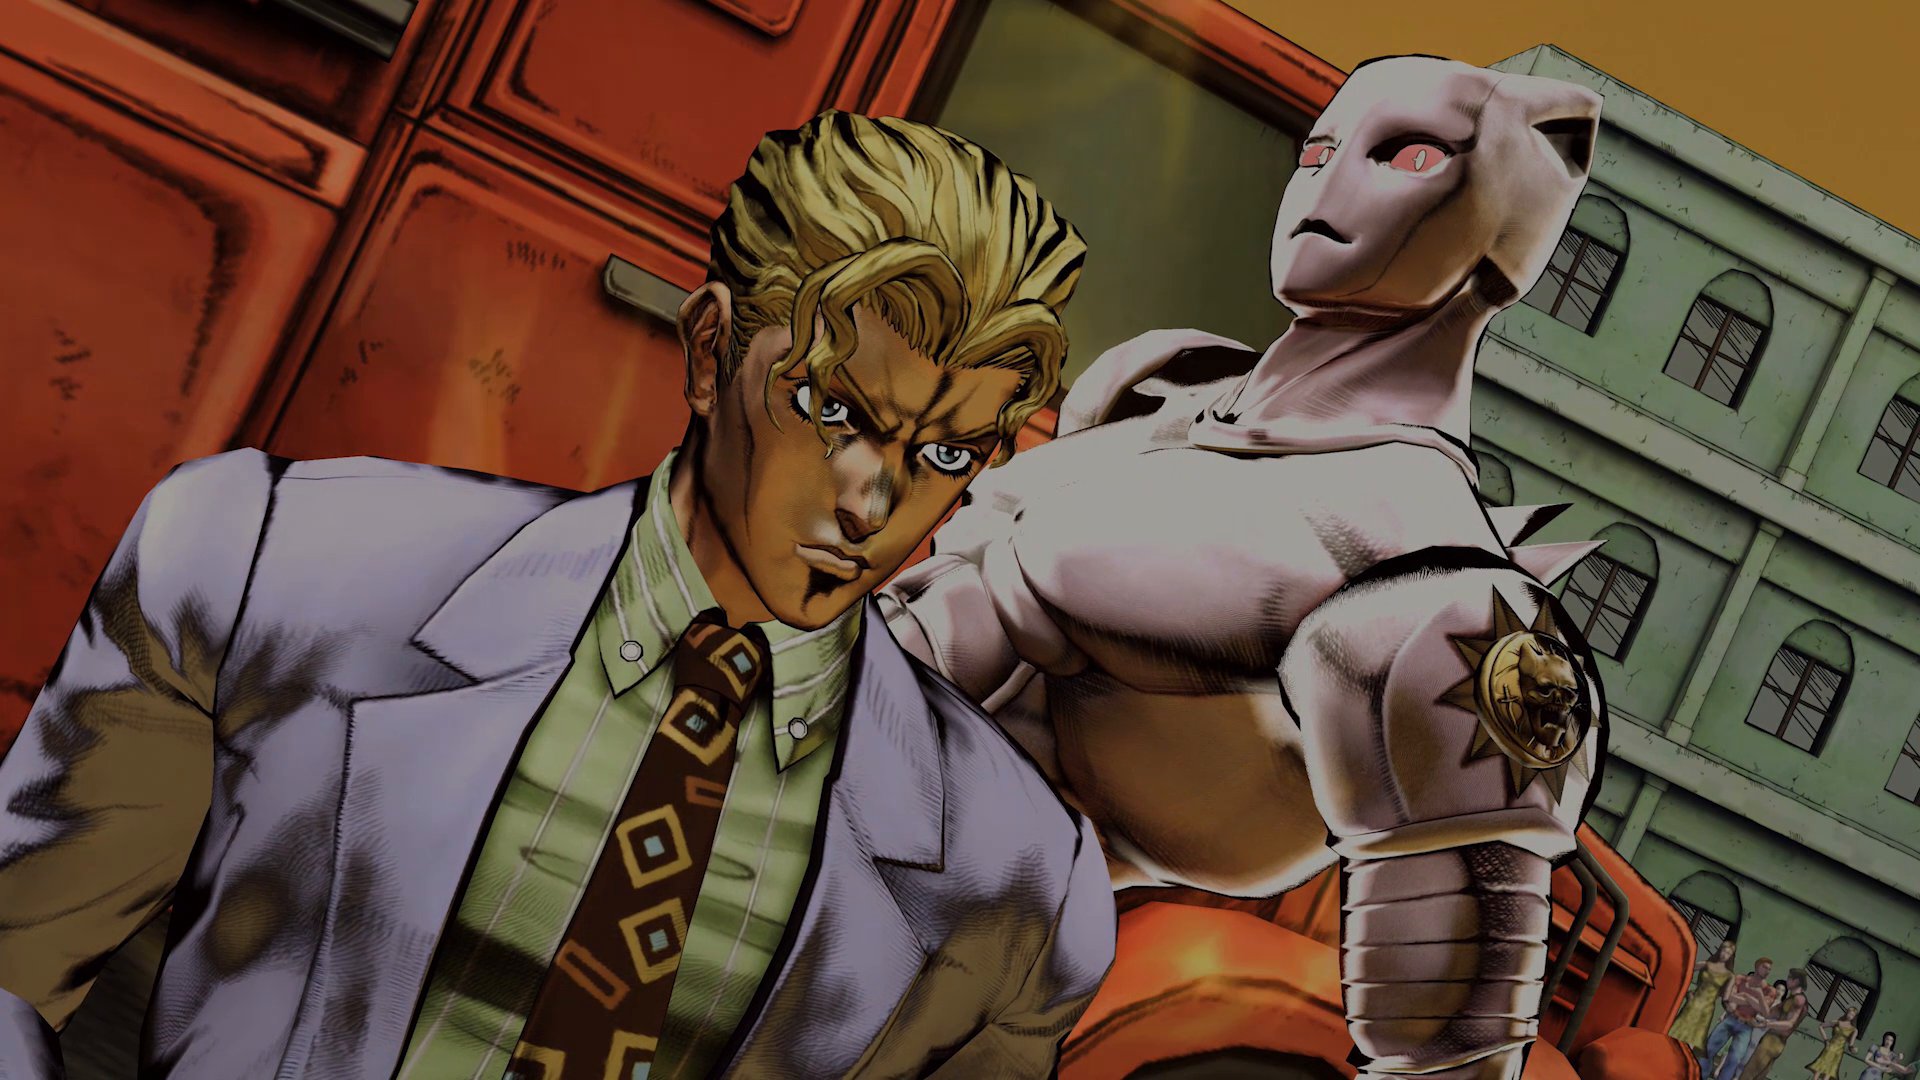 JoJo's Bizarre Adventure: All Star Battle R HANDedly One Of The Most Terrifying Villains In #JJBA History, Yoshikage Kira Continues To Strike Fear Into The Hearts Of Any Who Oppose Him